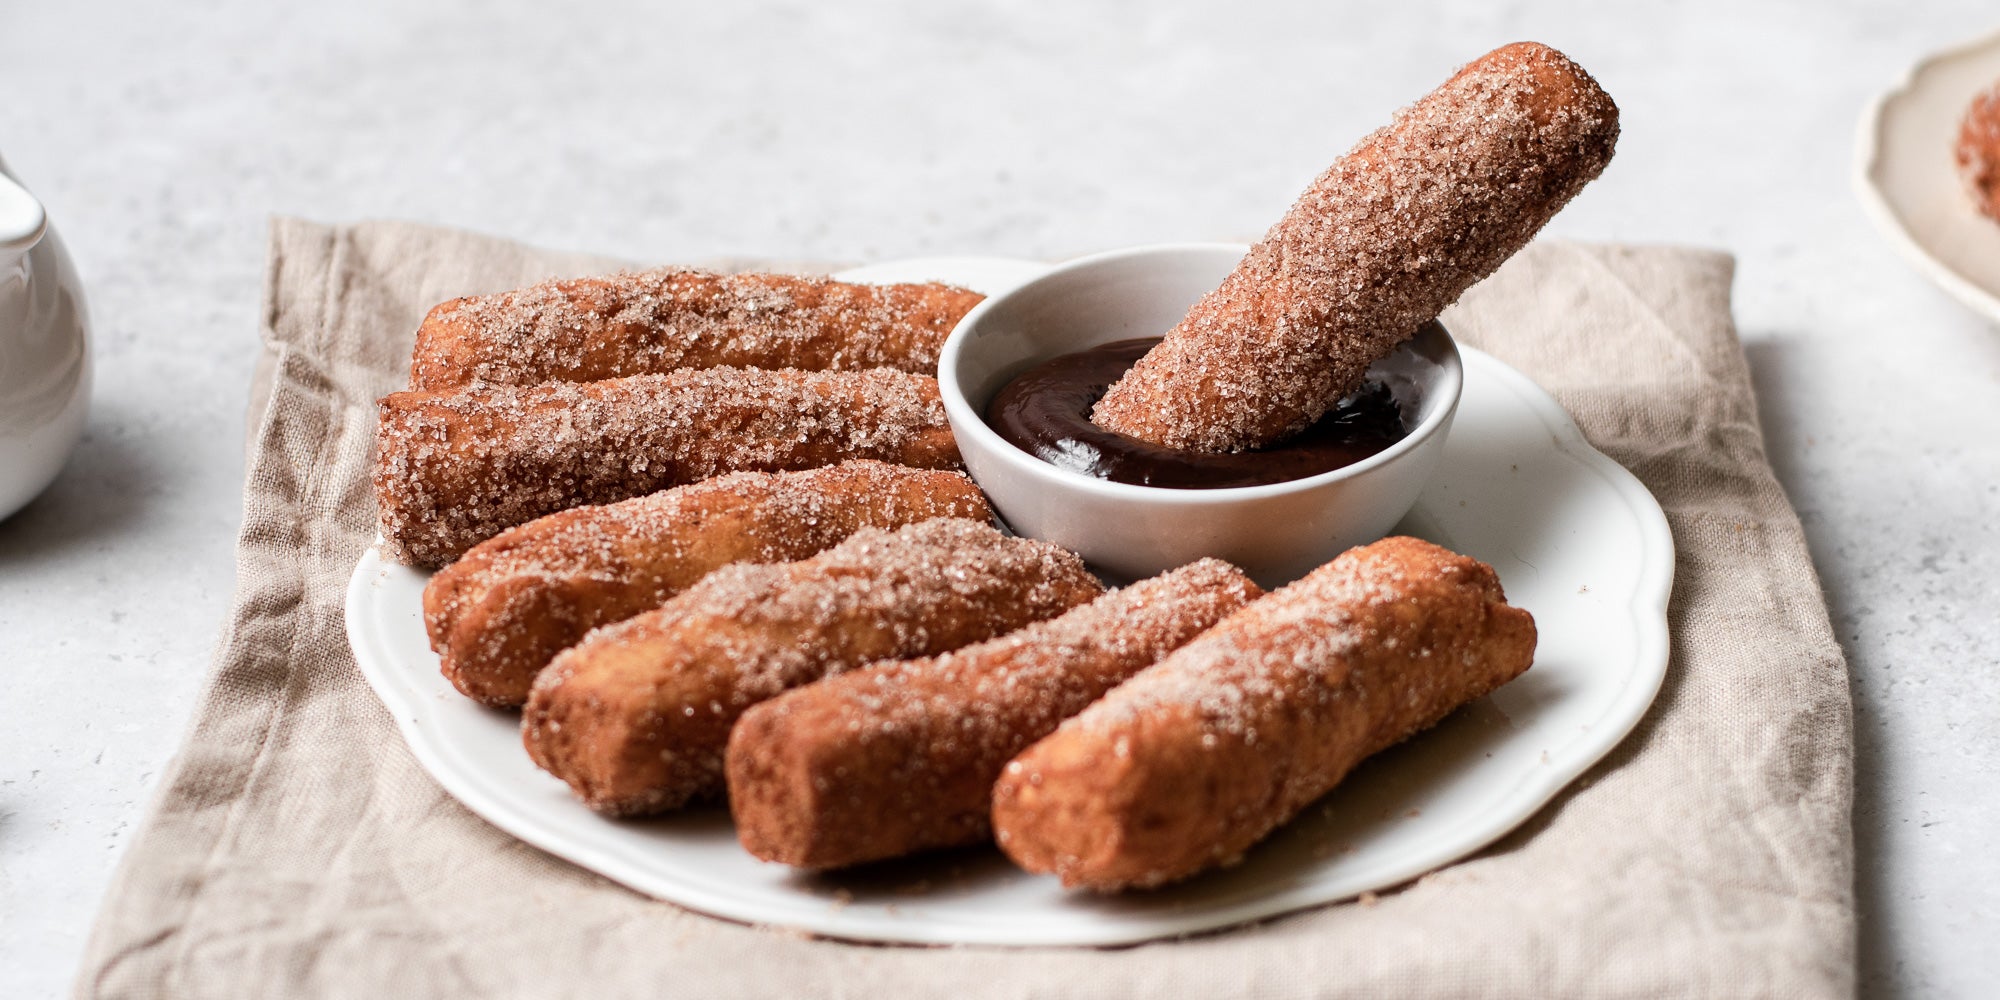 Doughnut Stick being dipped into chocolate dip surrounded by sugared doughnut sticks on a serving plate